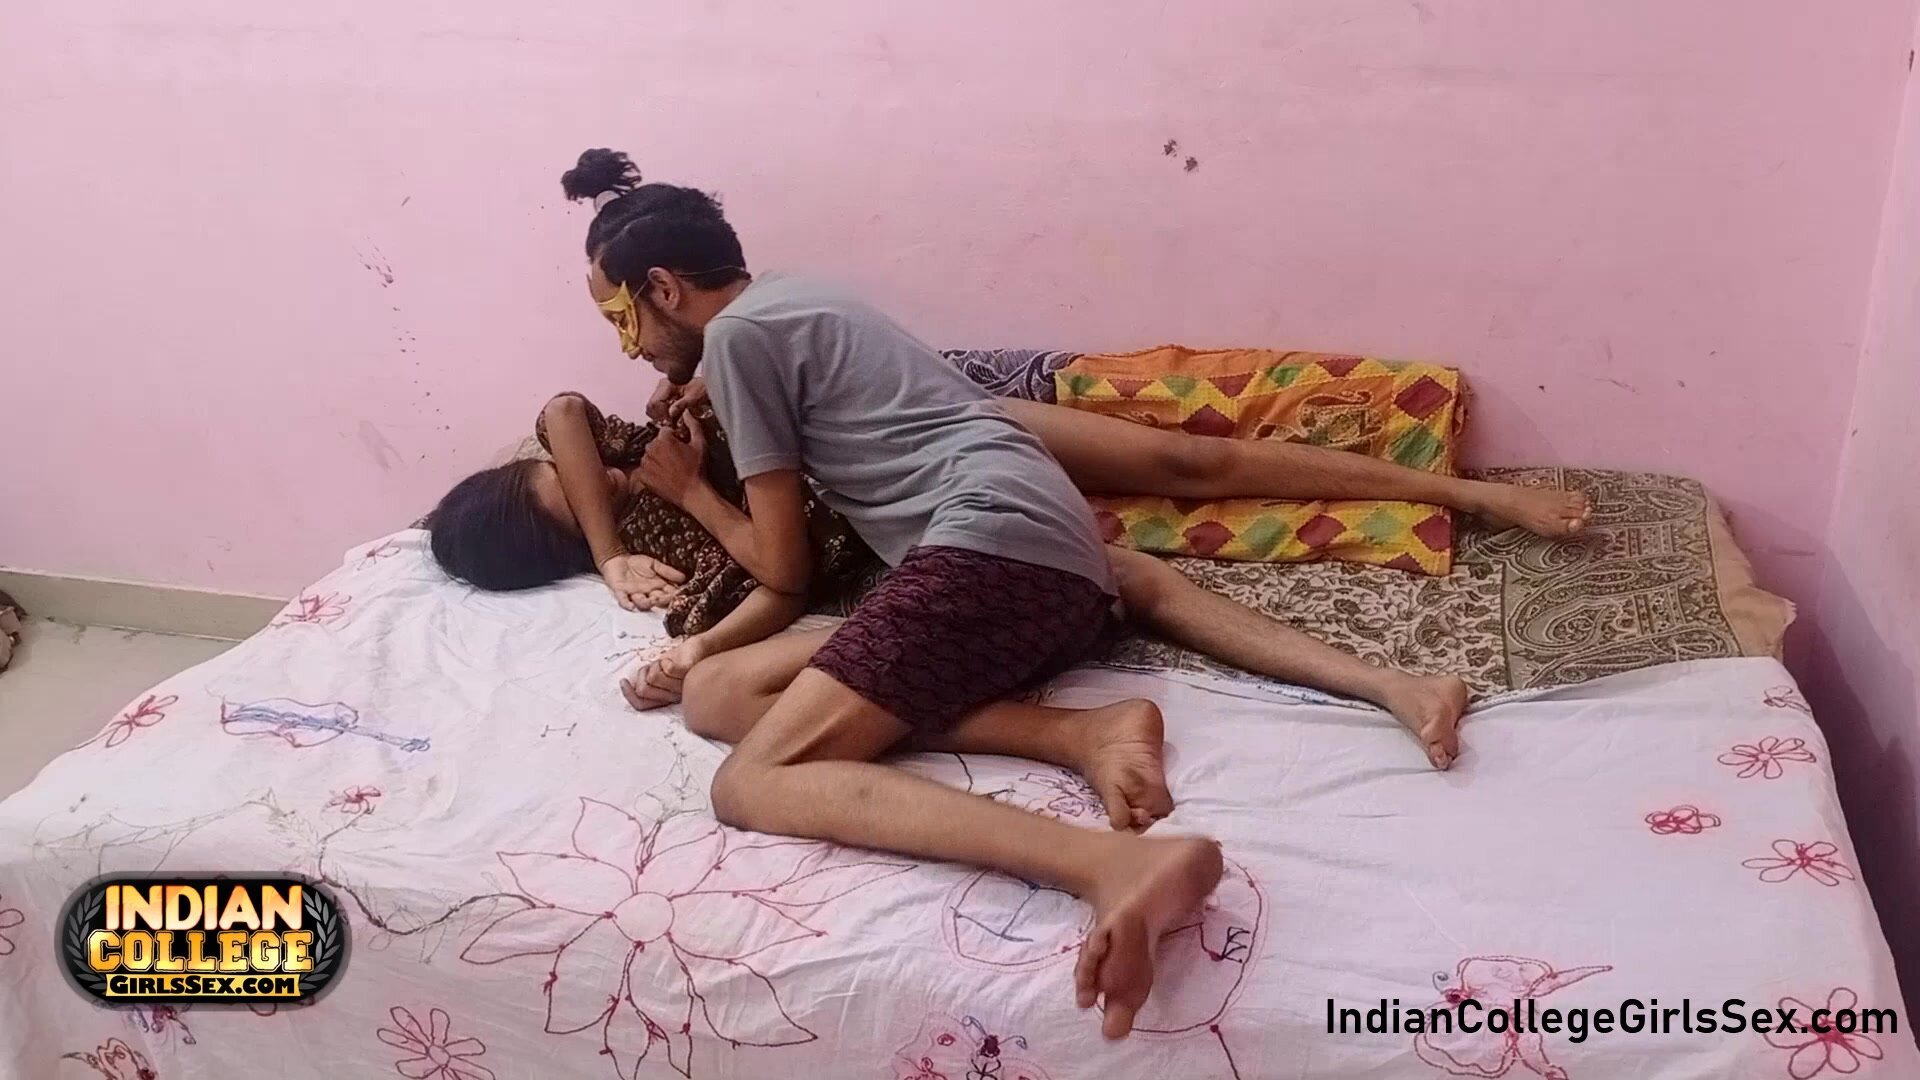 Amateur Indian skinny teen get an anal creampie after a hard desi pussy fucking sex at Fapnado picture